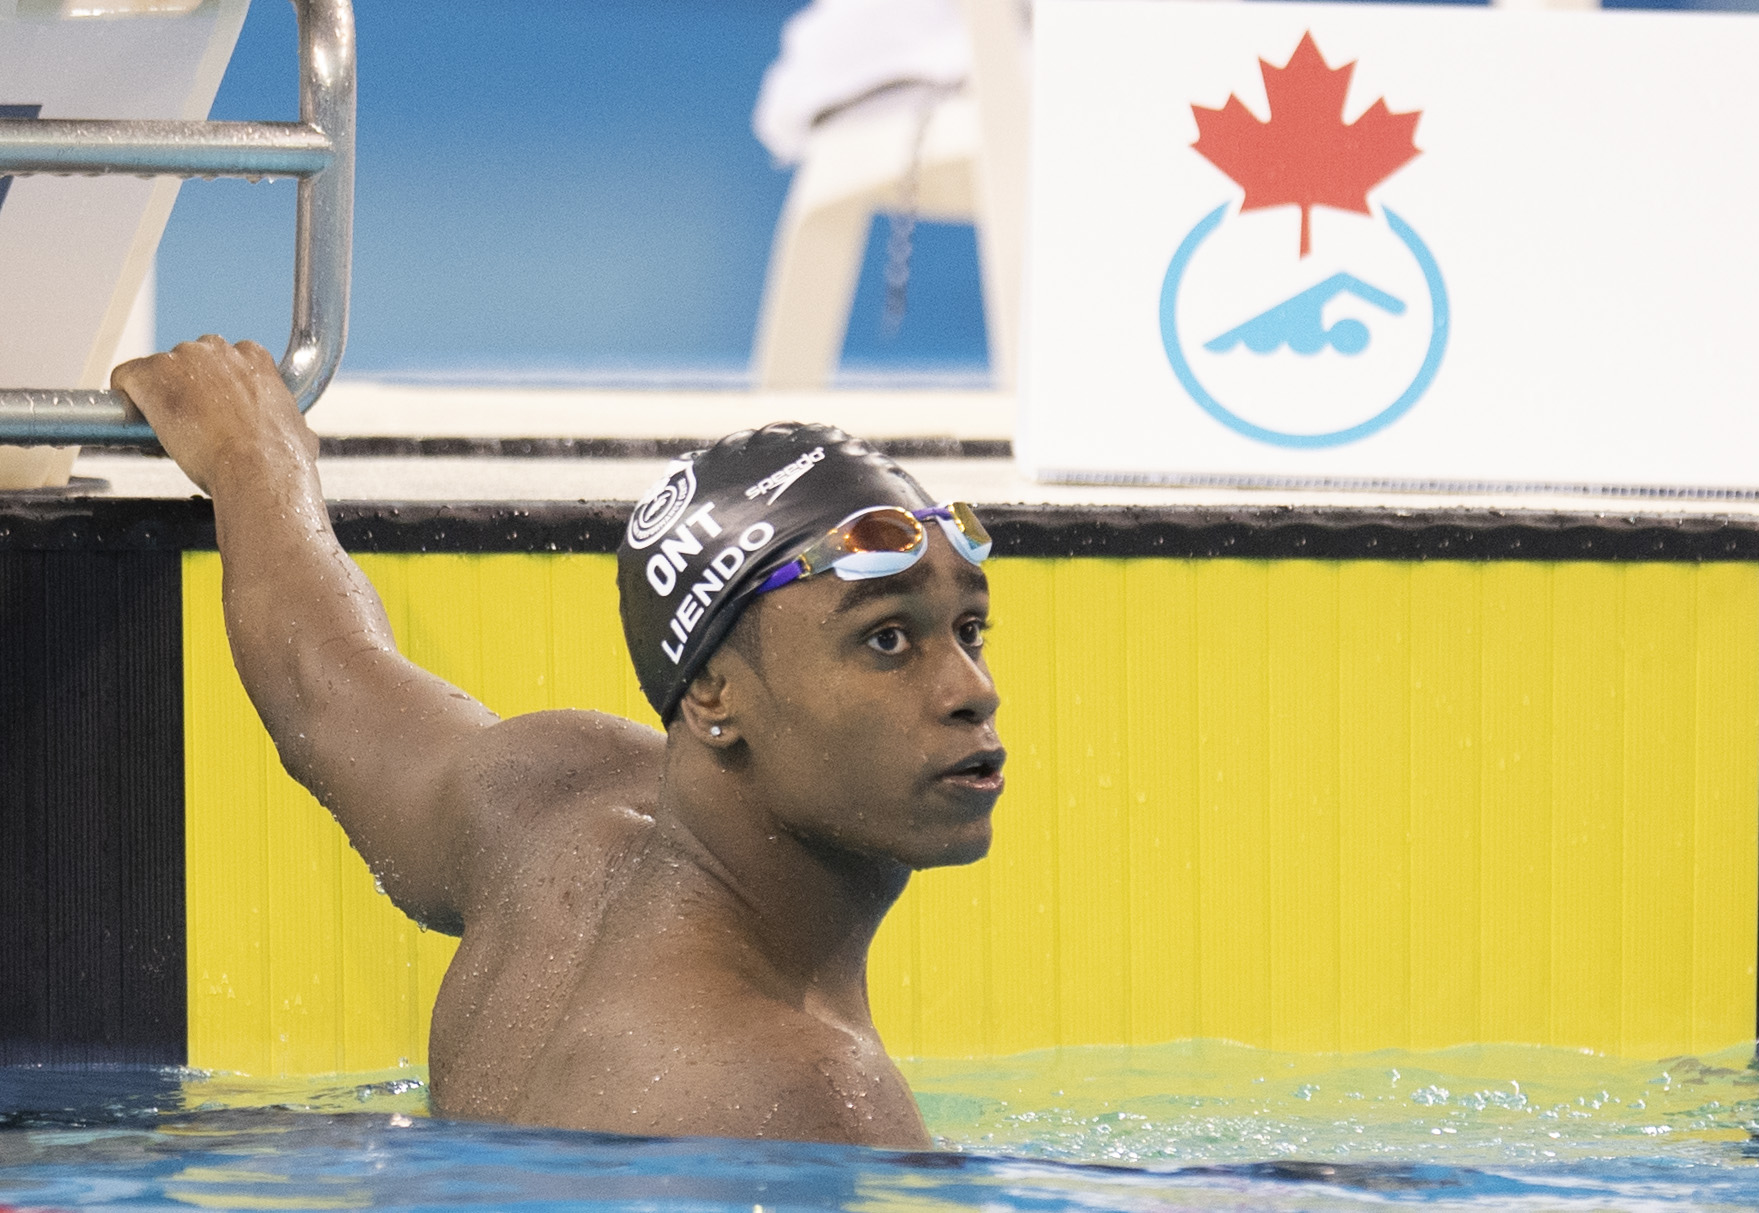 Liendo and Masse set Canadian records on opening day of Olympic